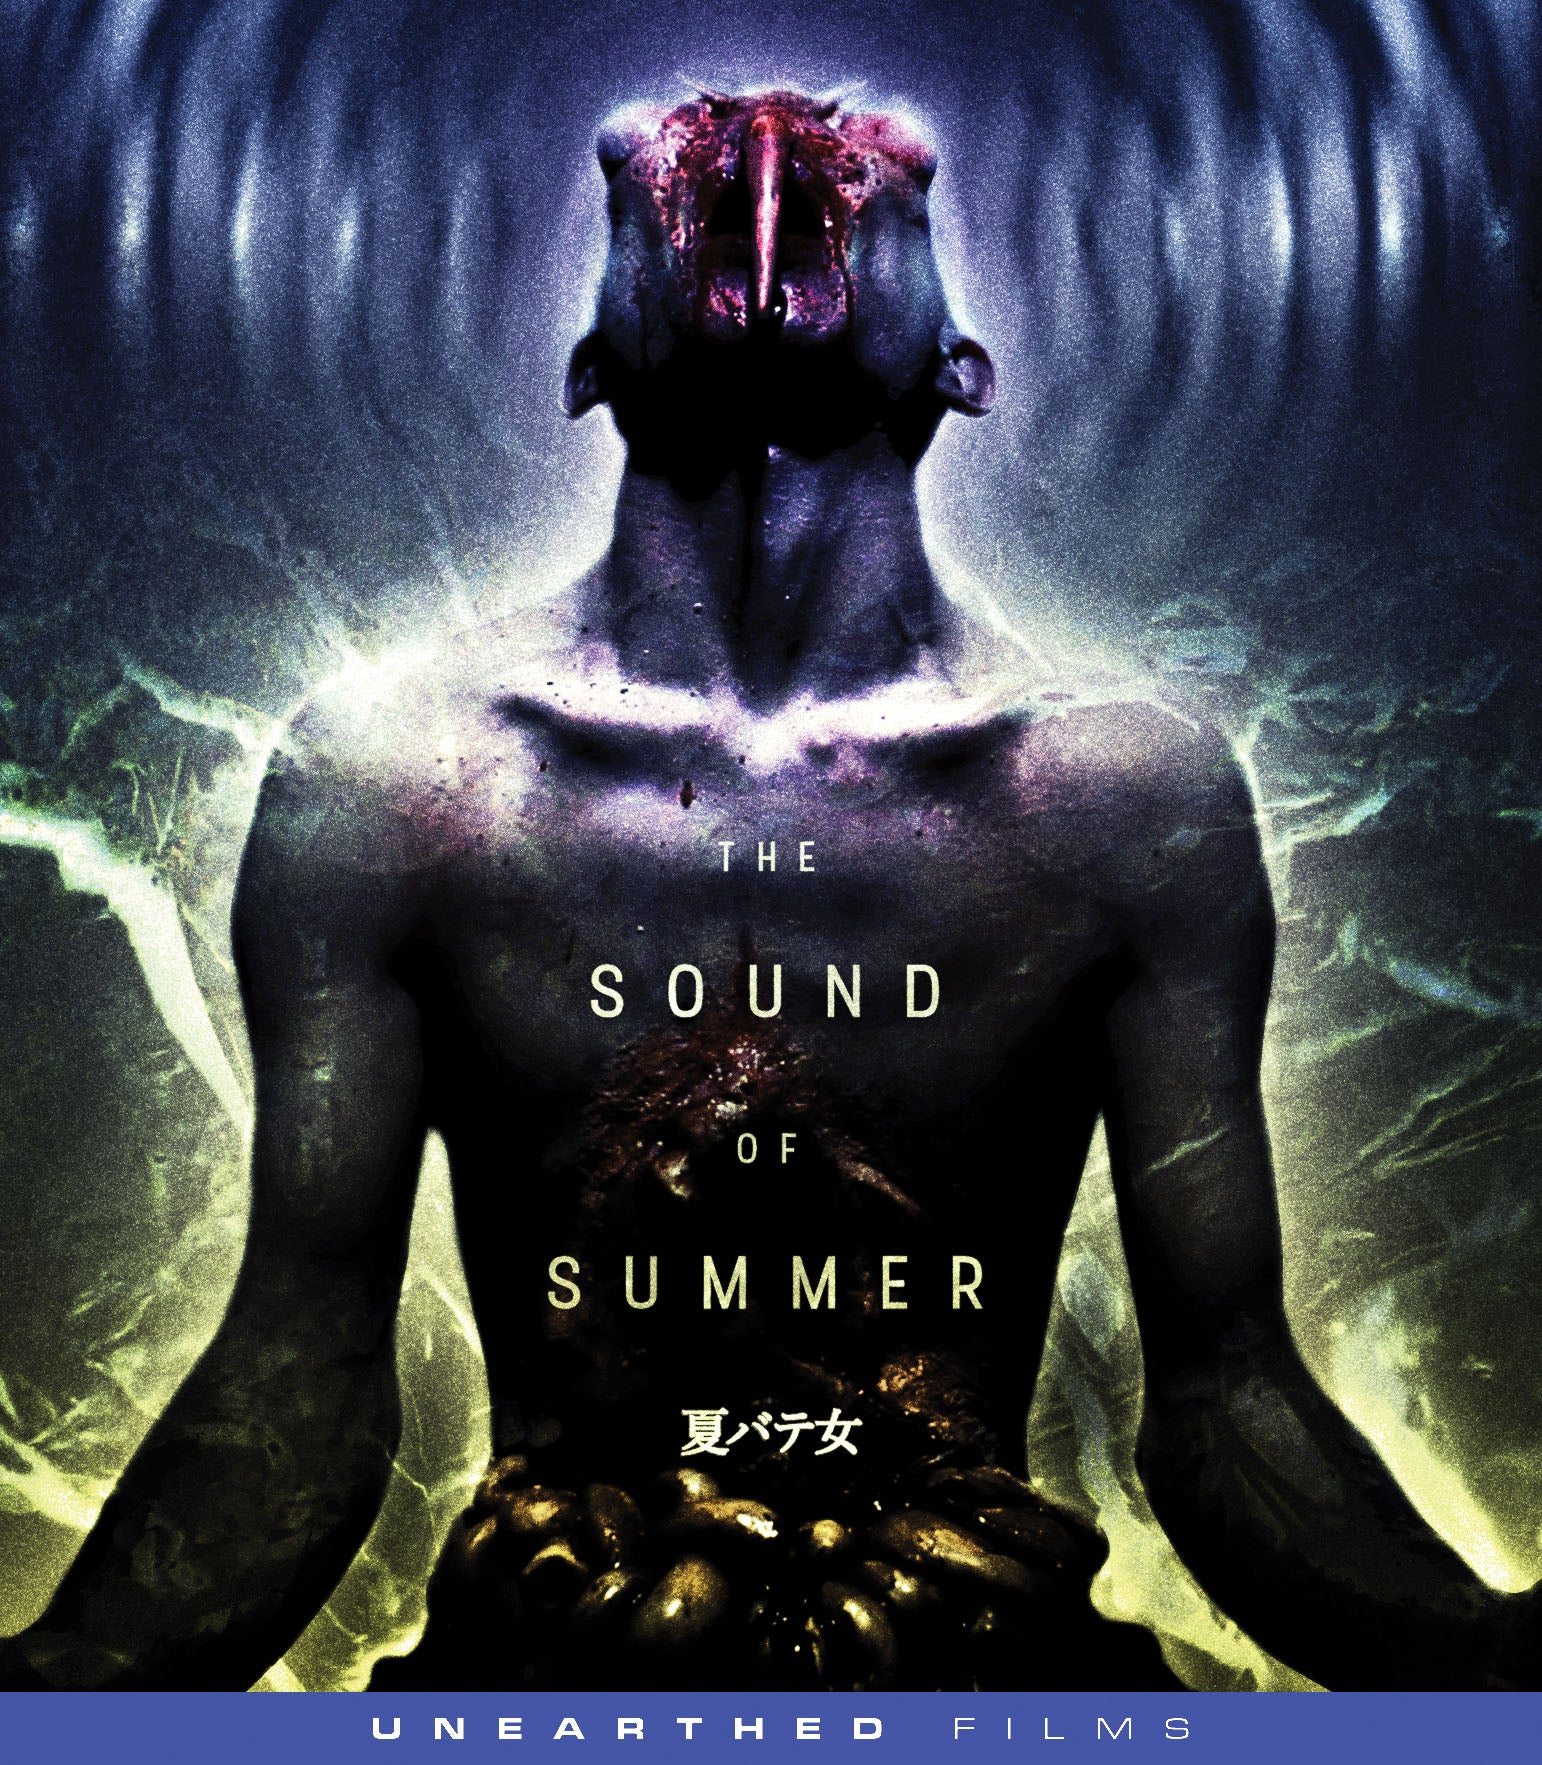 THE SOUND OF SUMMER BLU-RAY